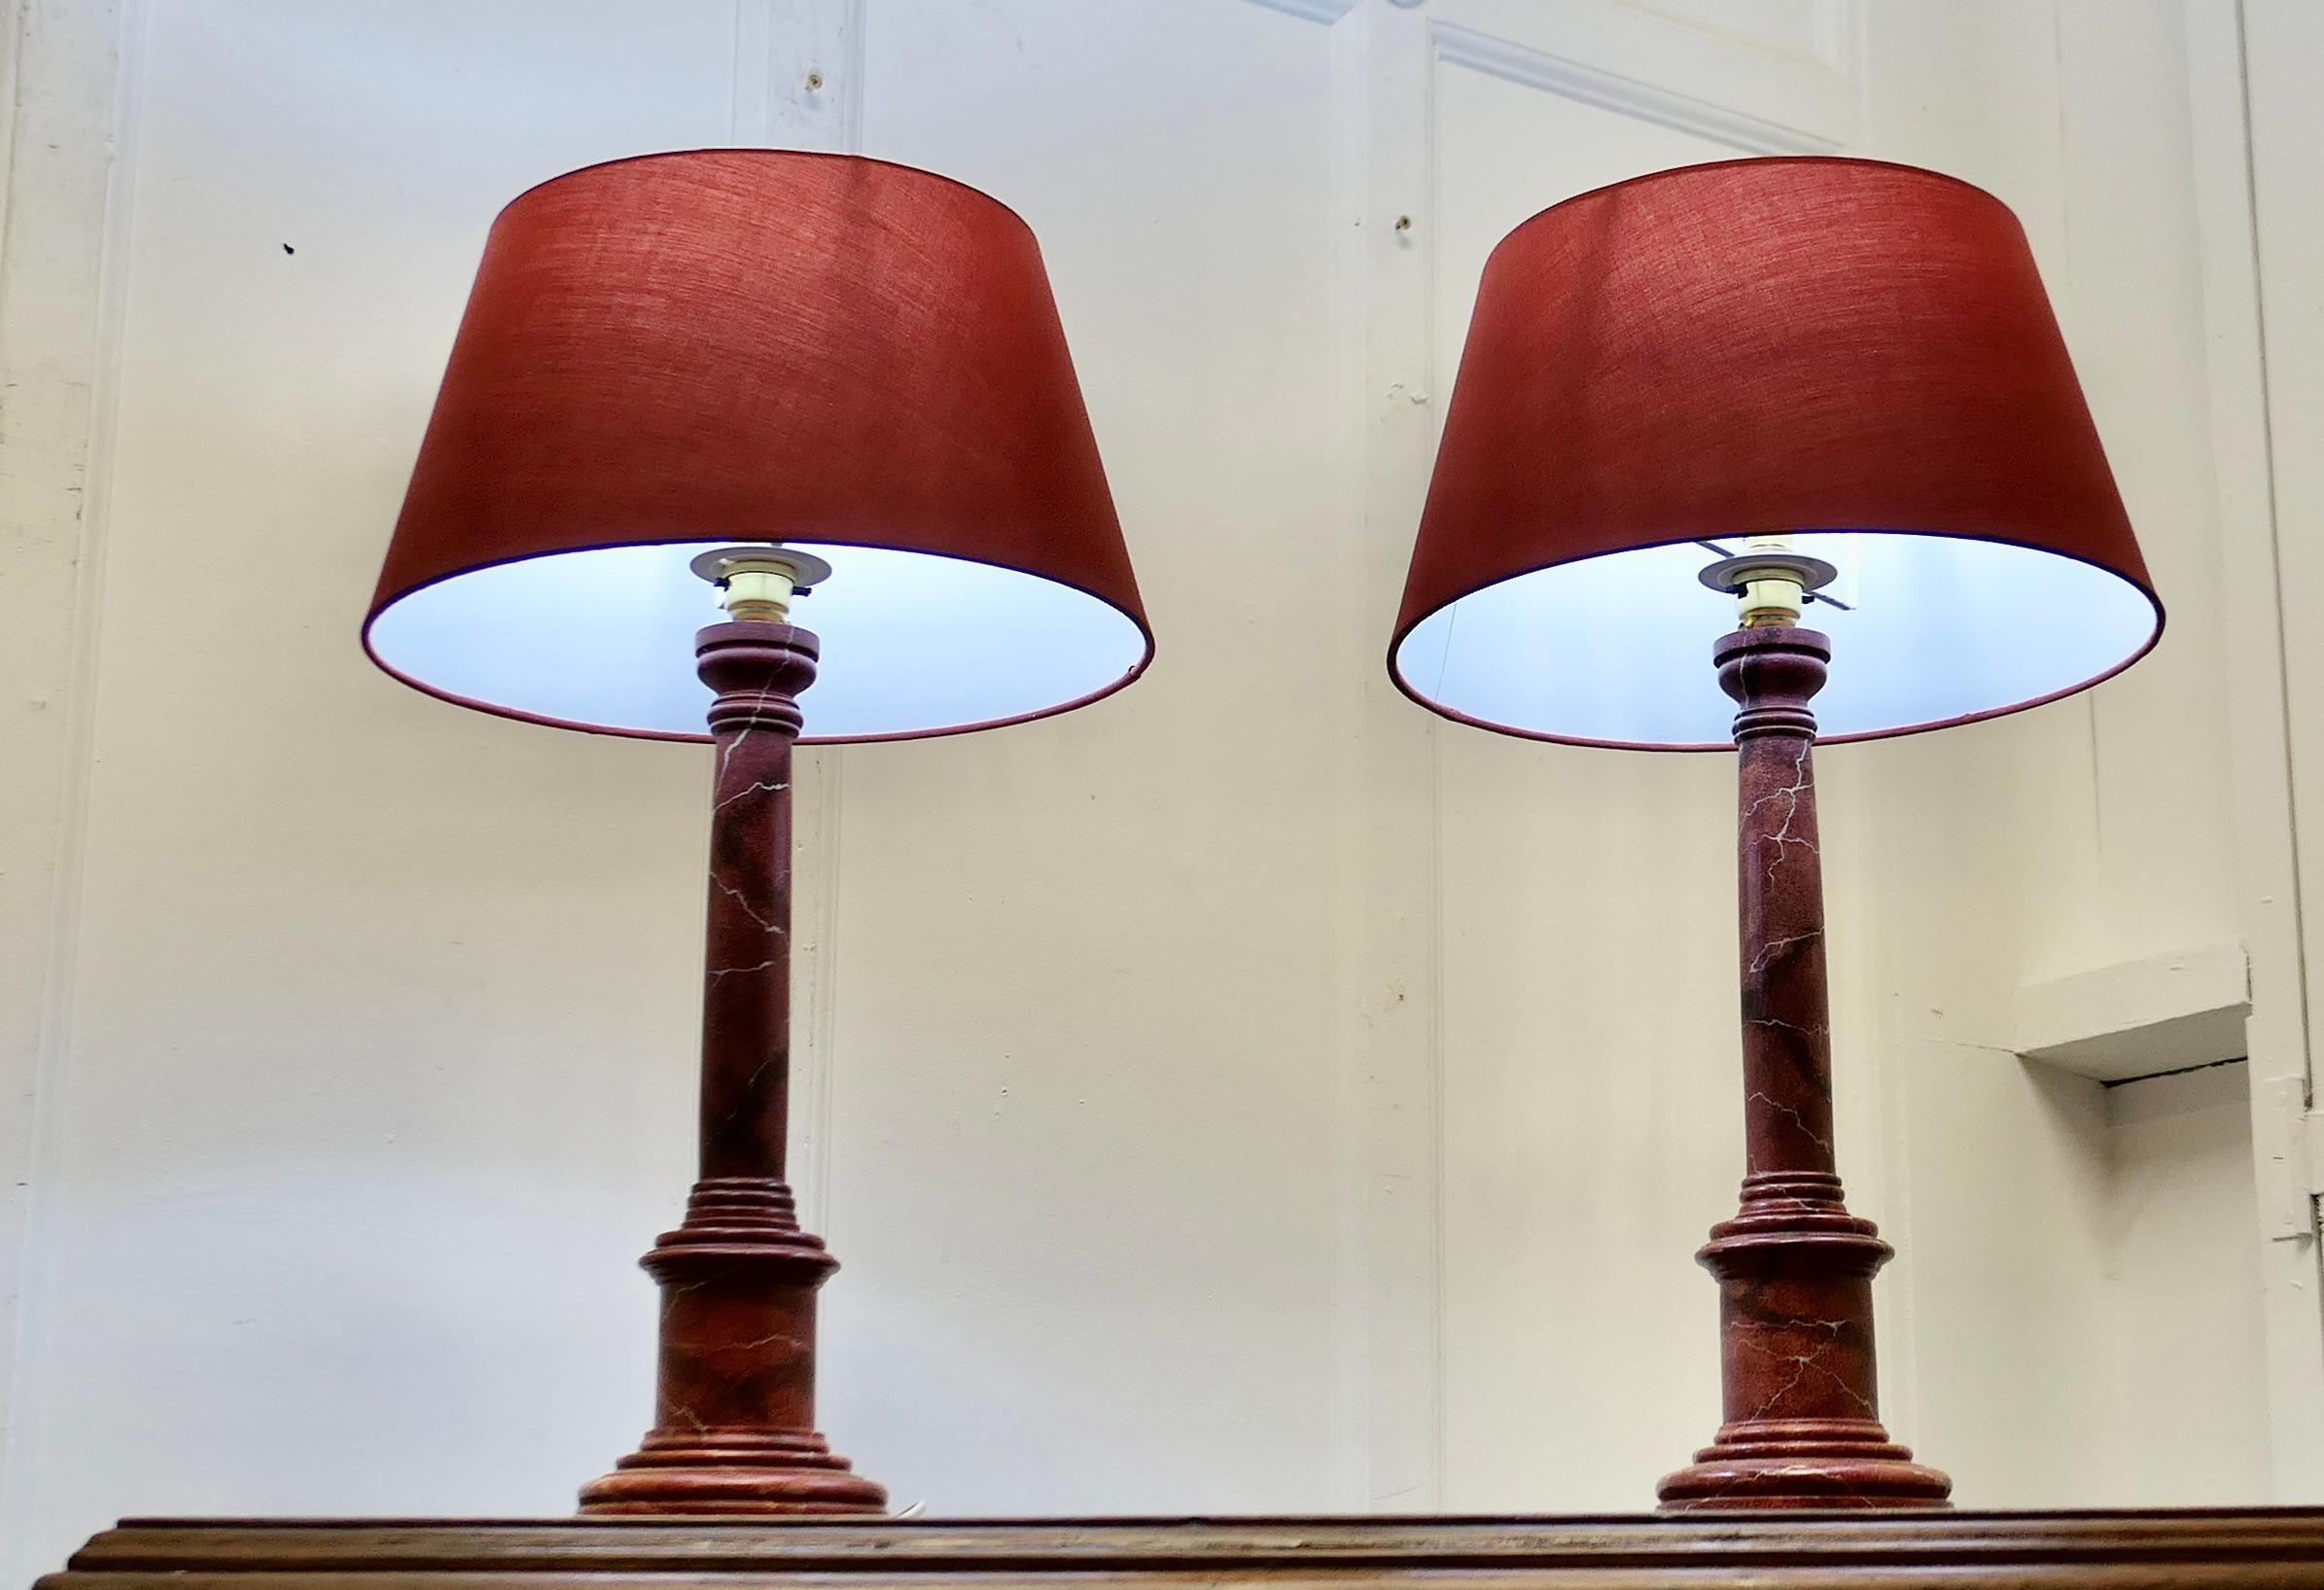 A Pair of Tall Simulated Marble Bedside Lamps with Shades

These are a very attractive pair of lamps they have a single corinthian style carved column set on a round stepped base, they have matching fabric shades
The lamps are in good condition,